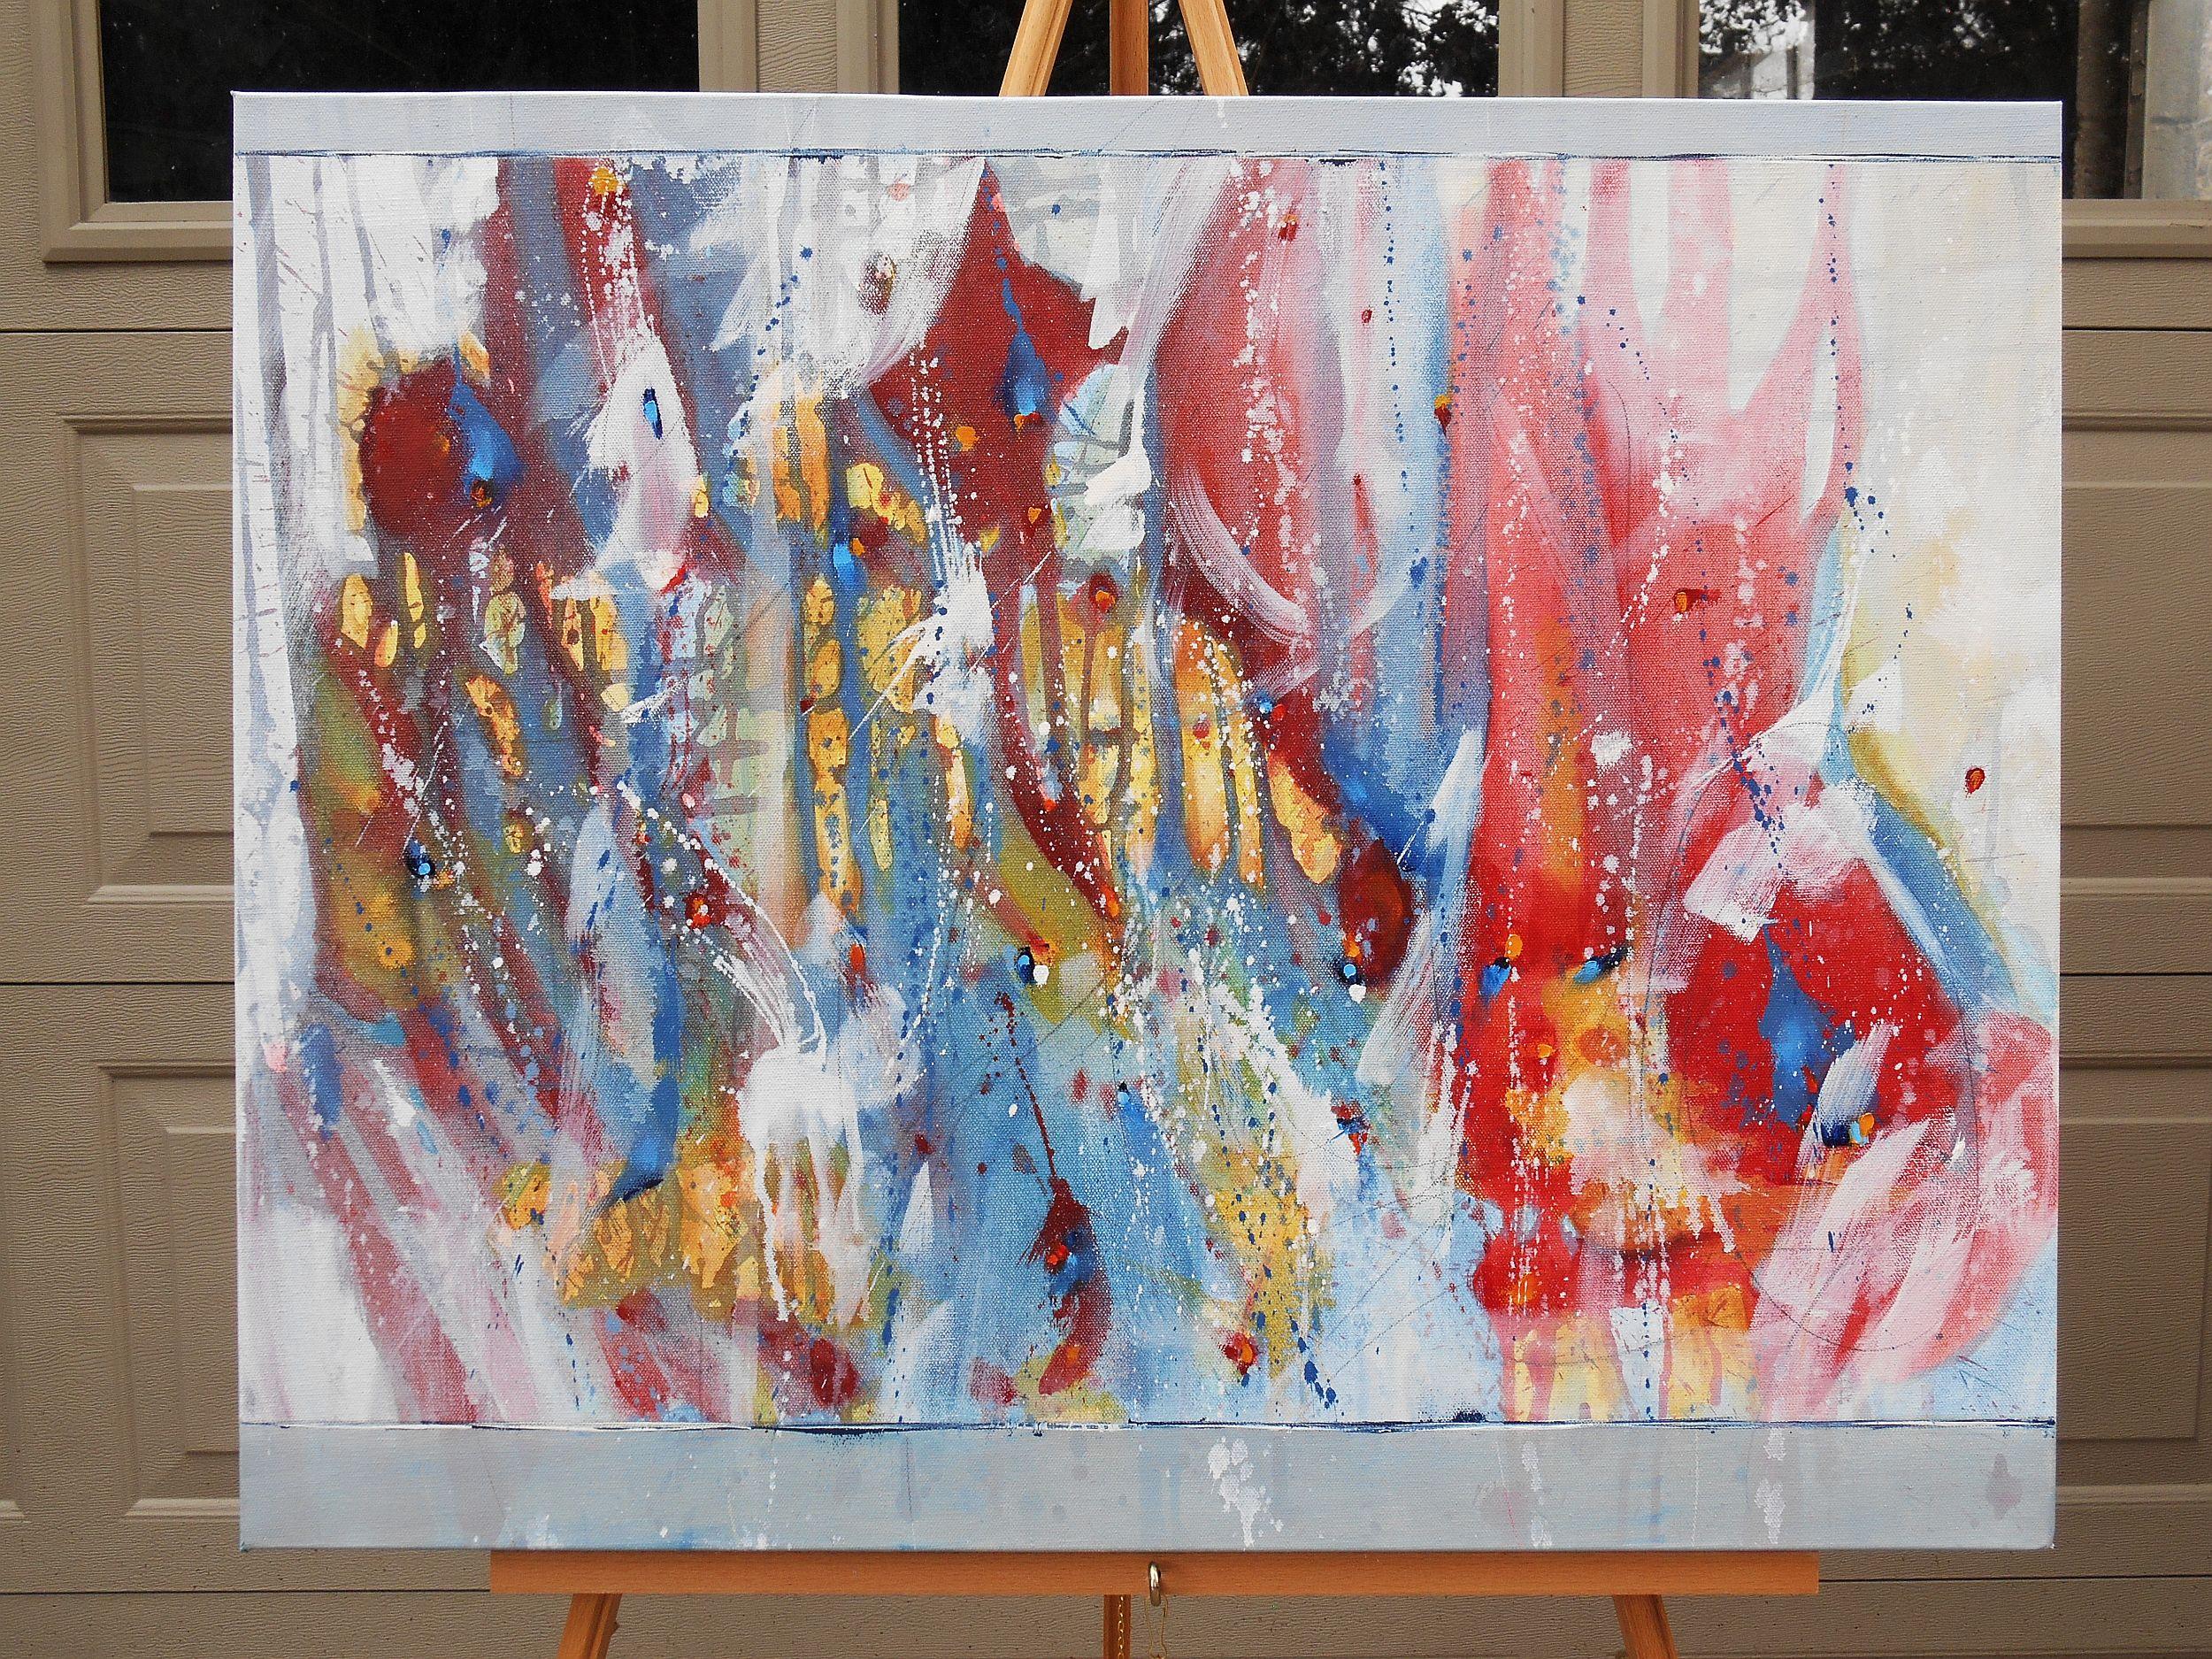 <p>Artist Comments<br>Artist Cynthia Ligeros presents an abstract inspired by the stunning colors in the clouds rising at dawn. The expressive brushwork depicts red clouds and heavenly bodies in mesmerizing movements. Cynthia creates organic forms